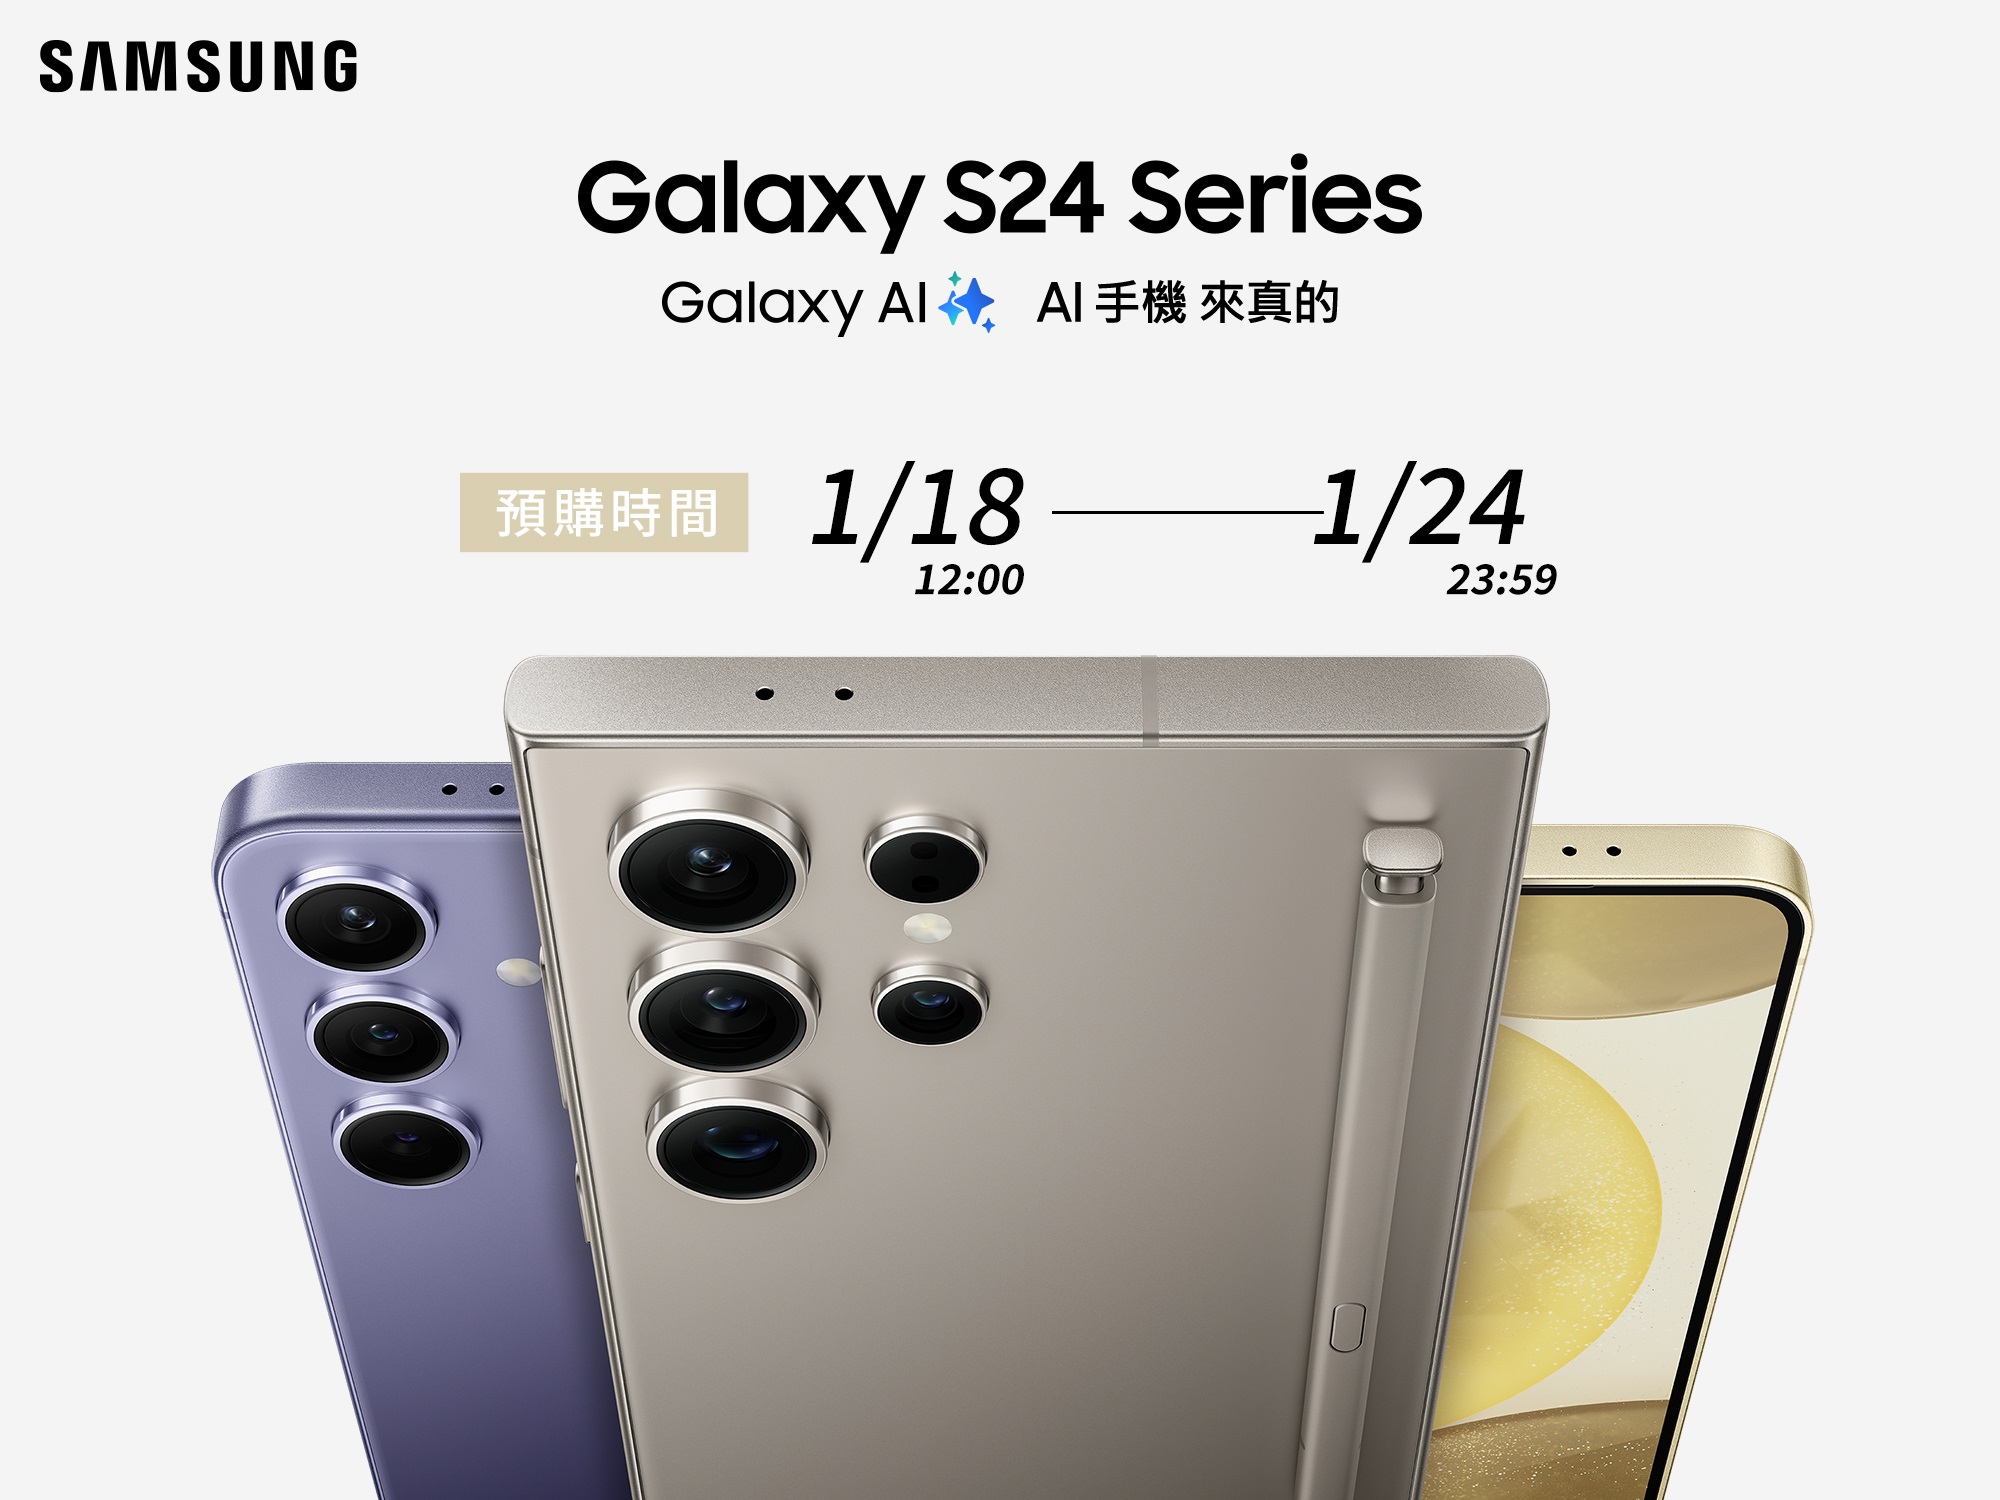 Samsung Officially Launches the Flagship Galaxy S24 Series with Galaxy AI Features; Pre-Orders at PChome 24h Shopping Begin at 12:00 Noon, January 18